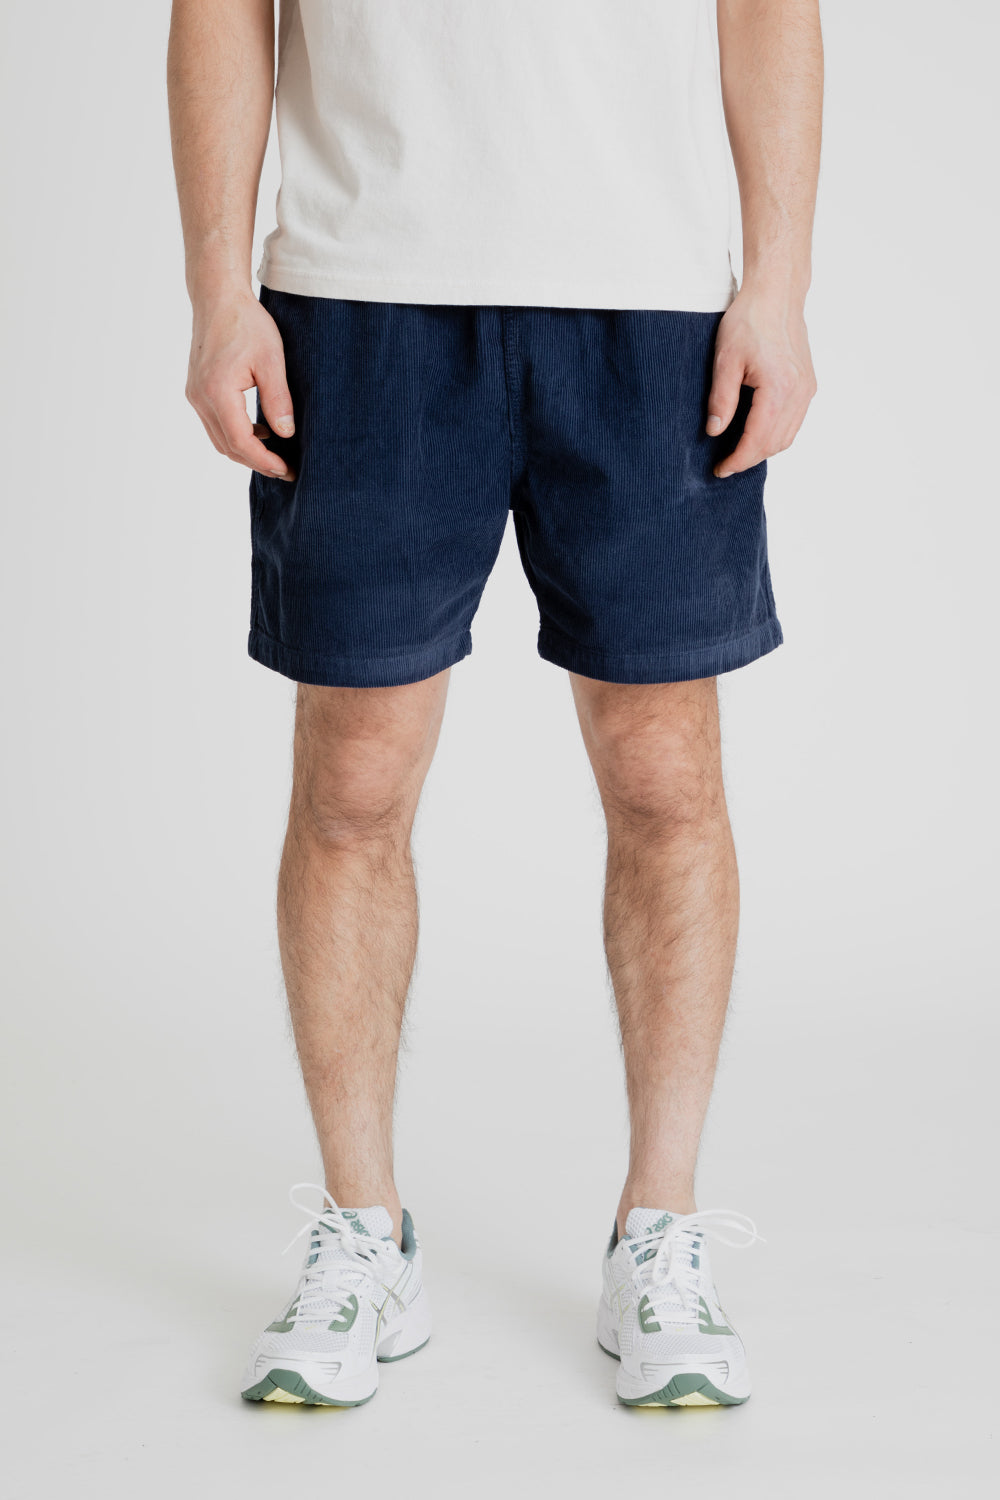 Foret Dose Corduroy Shorts in Navy